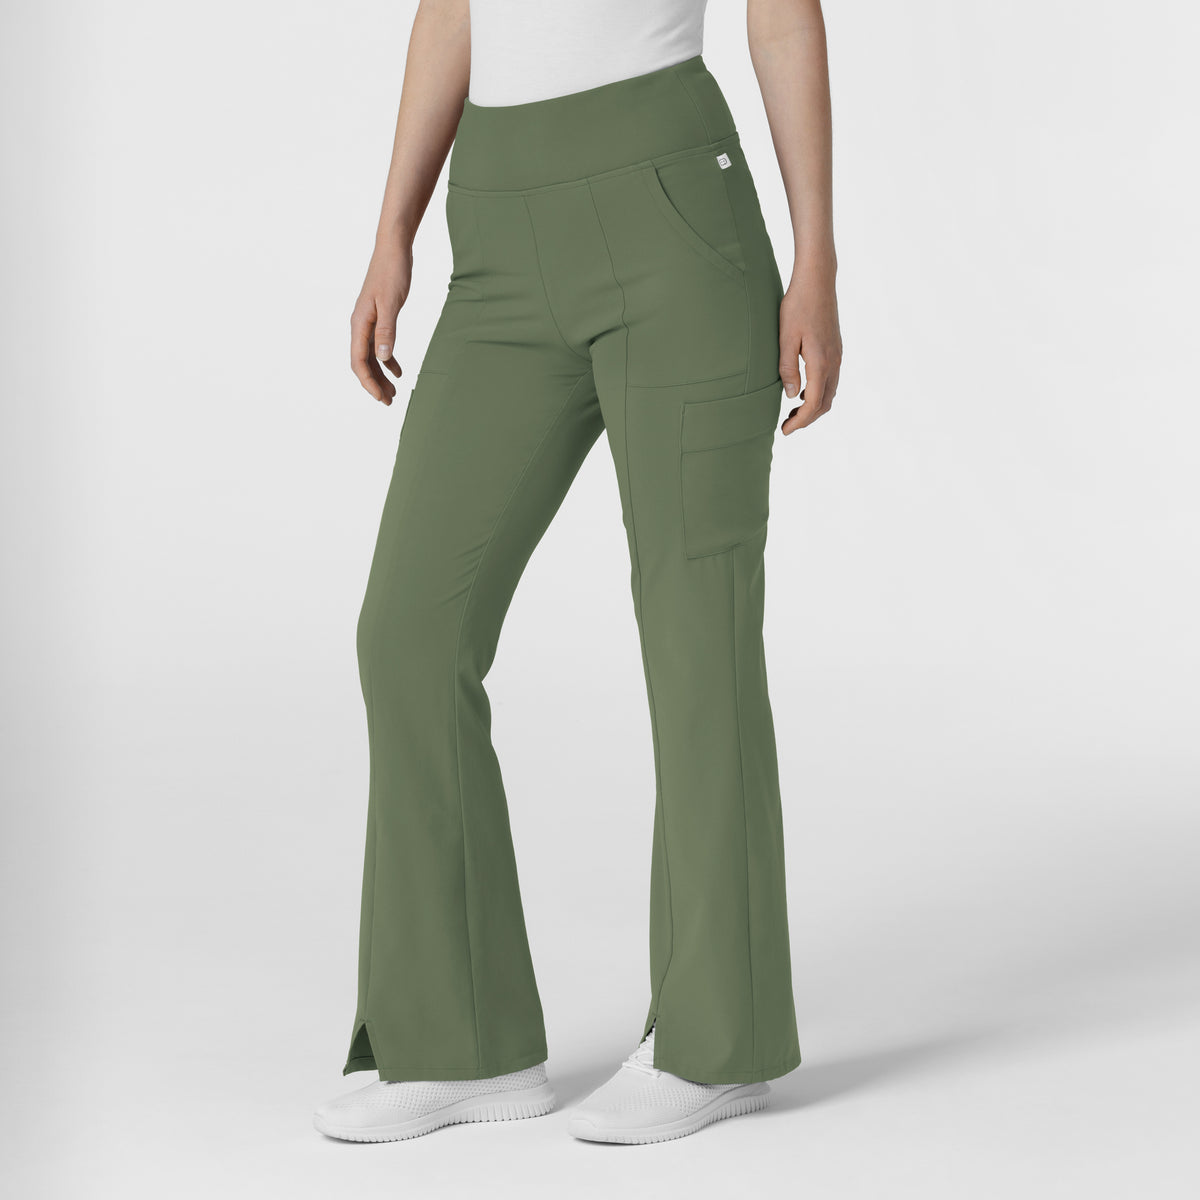 RENEW Women's Cargo Flare Scrub Pant Olive side view